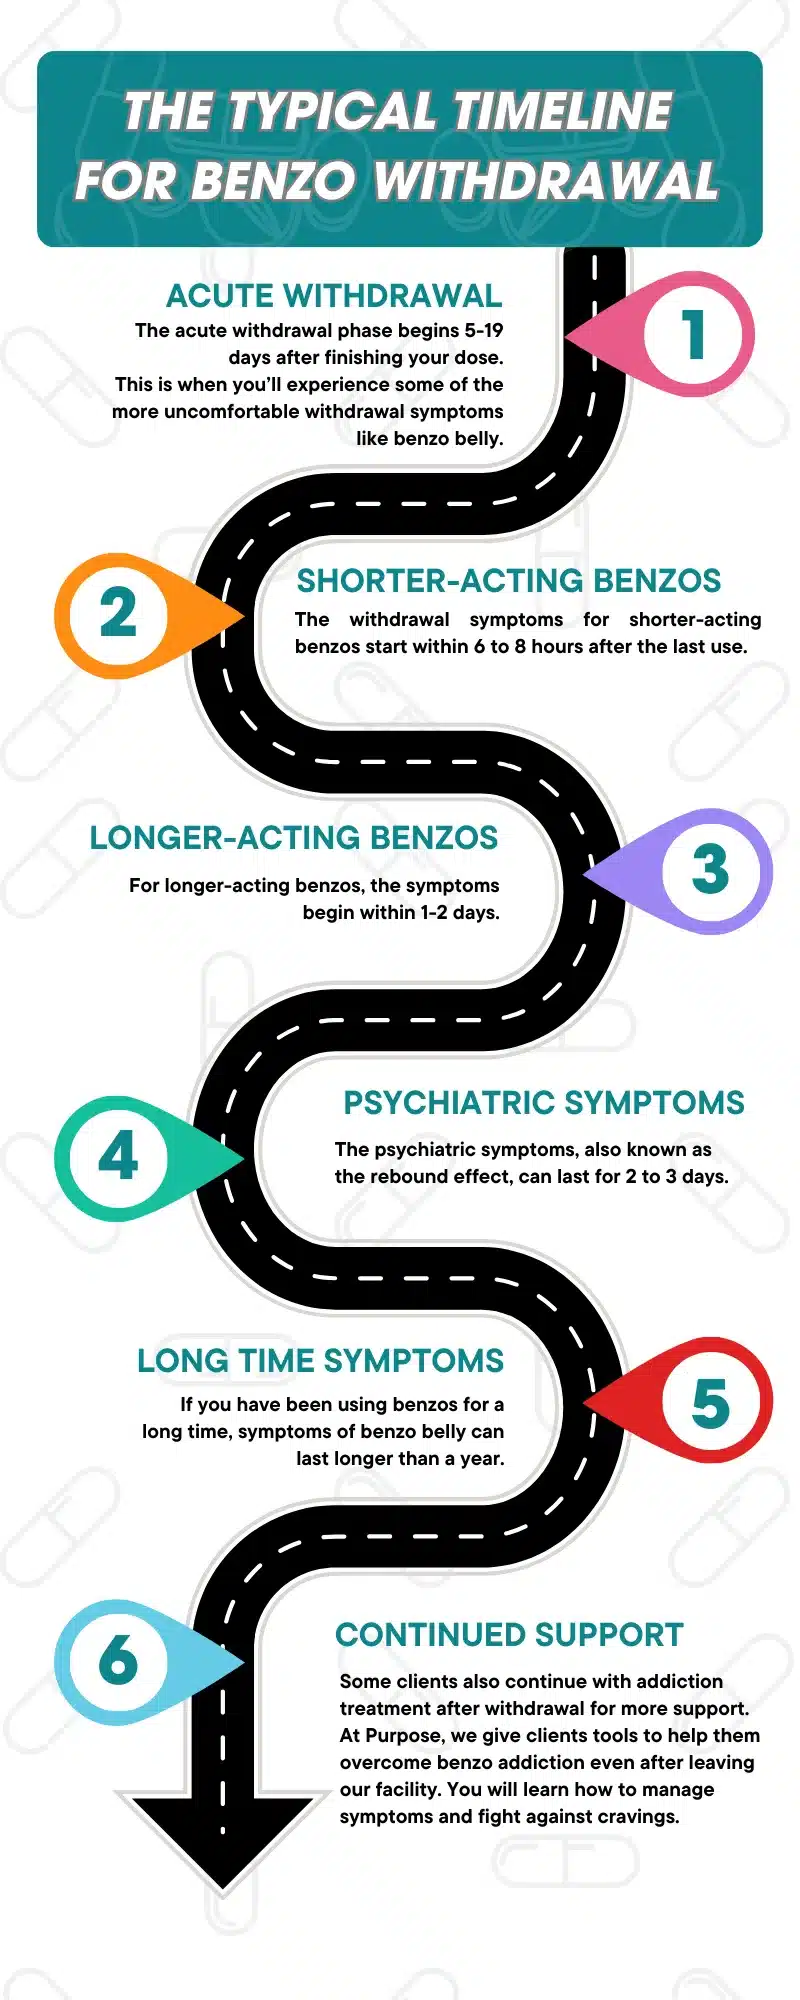 Benzo withdrawal timeline infographic from Purpose Healing Center and our unbeaten benzo detox program